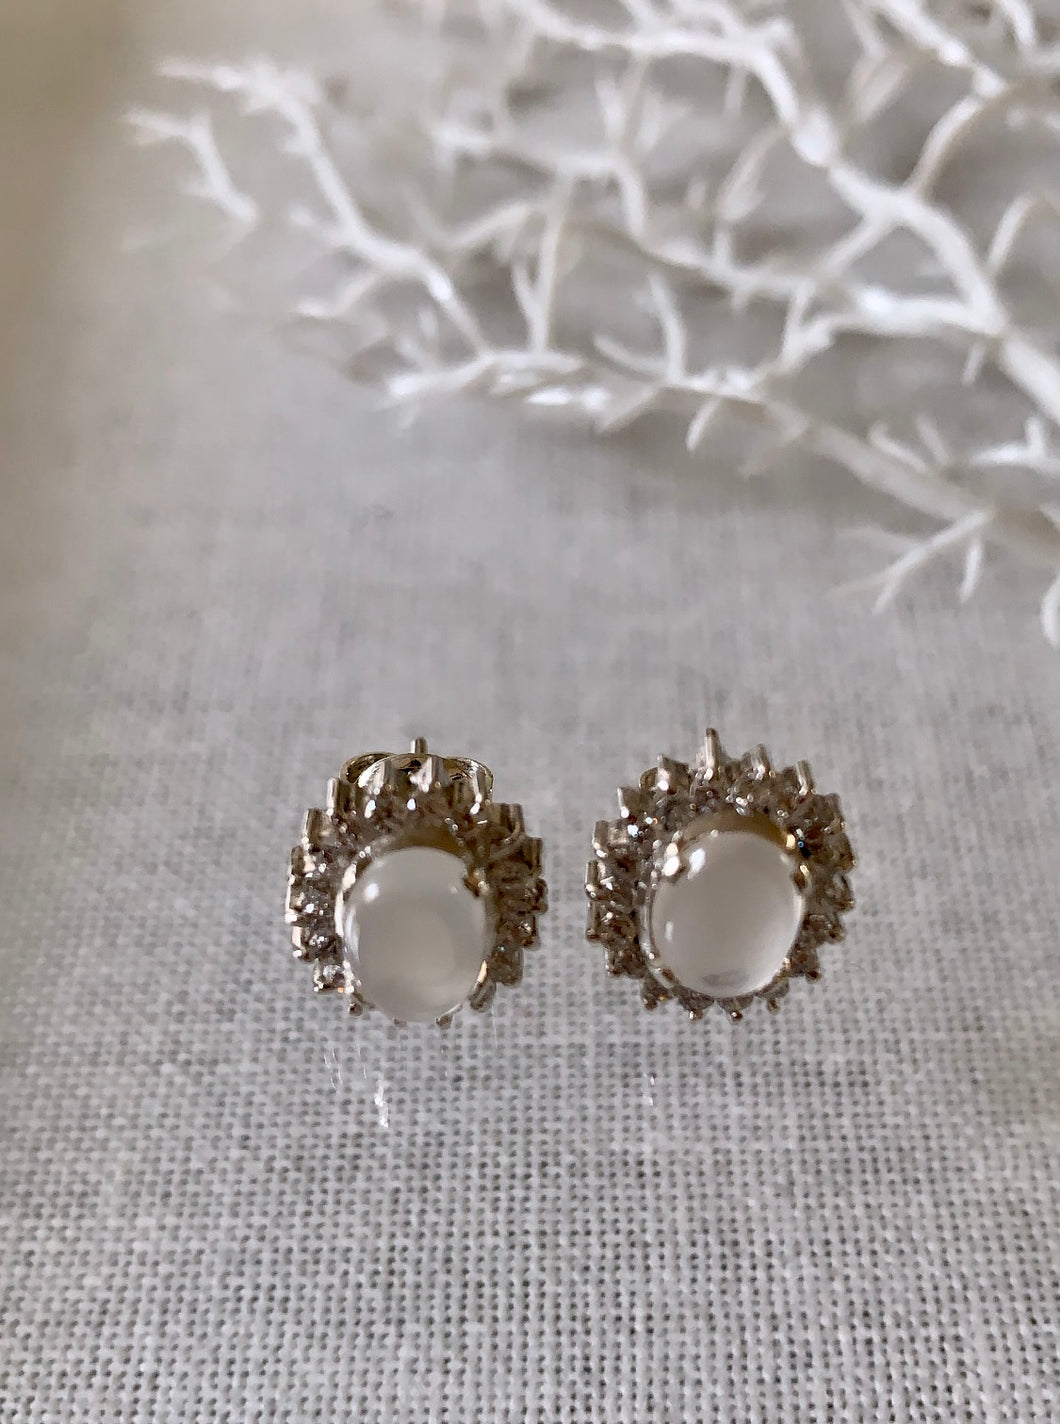 Ear studs with Moonstone & Cubic Zirconia